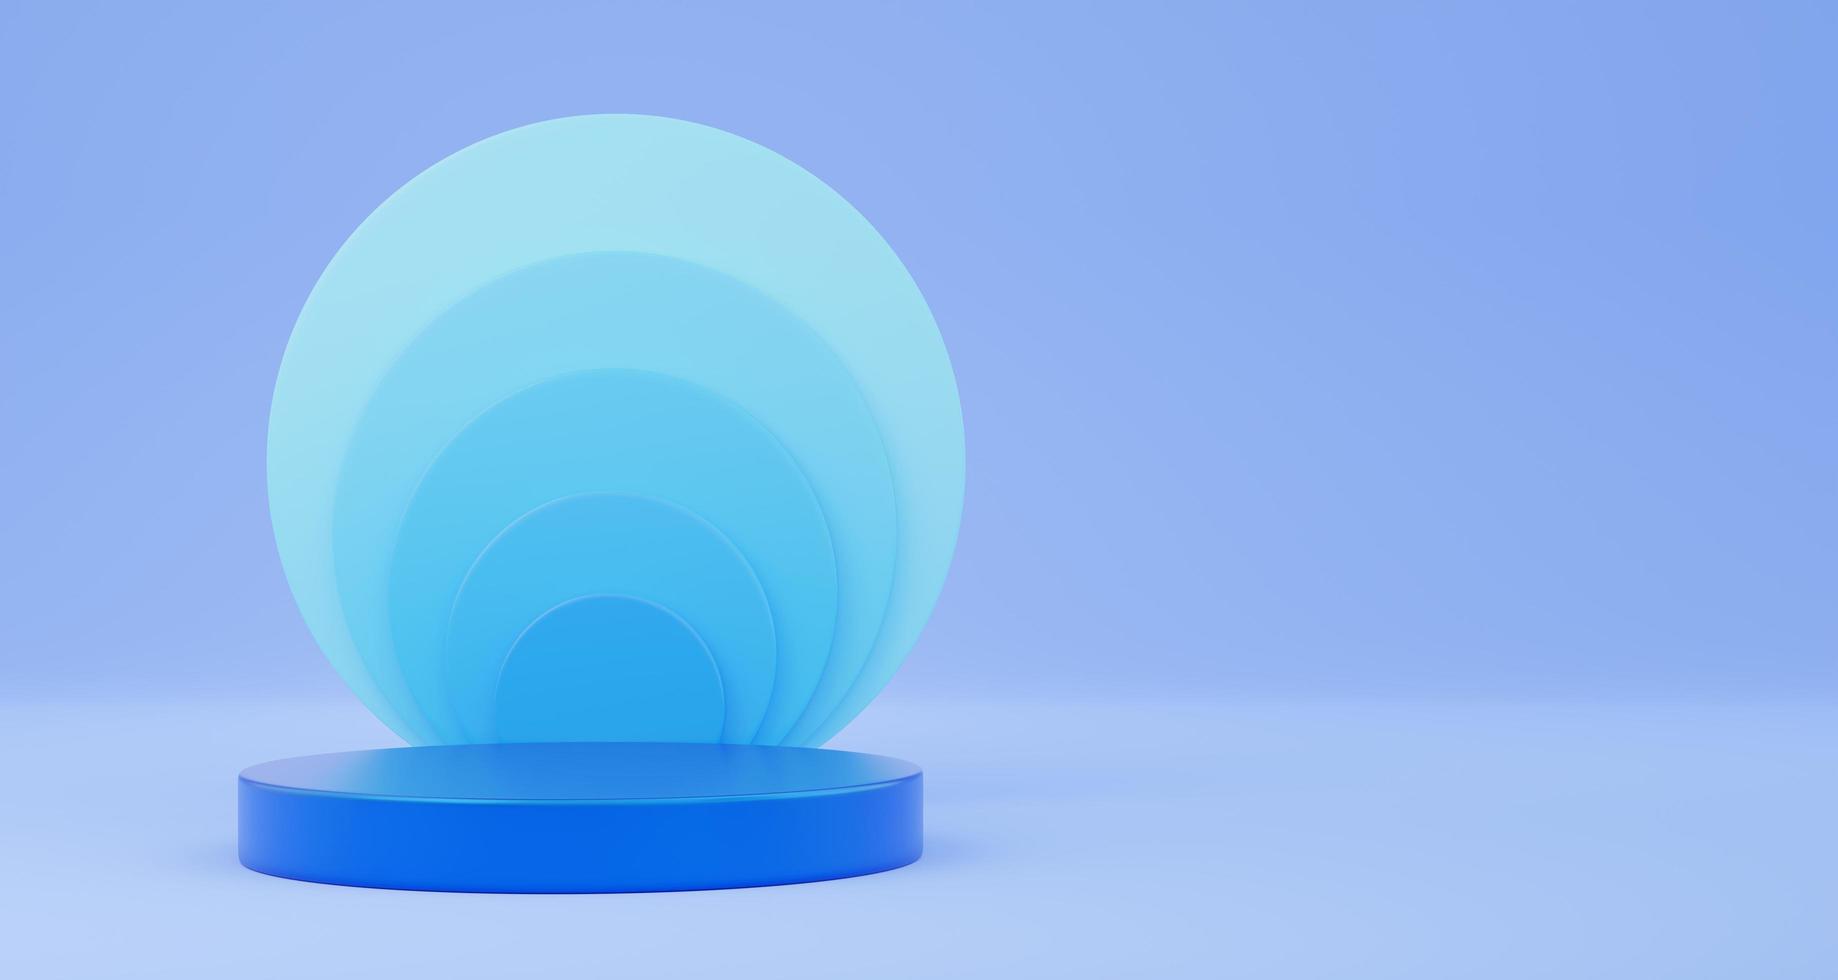 Empty blue cylinder podium on blue background. Abstract minimal studio 3d geometric shape object. Mockup space for display of product design. 3d rendering. photo